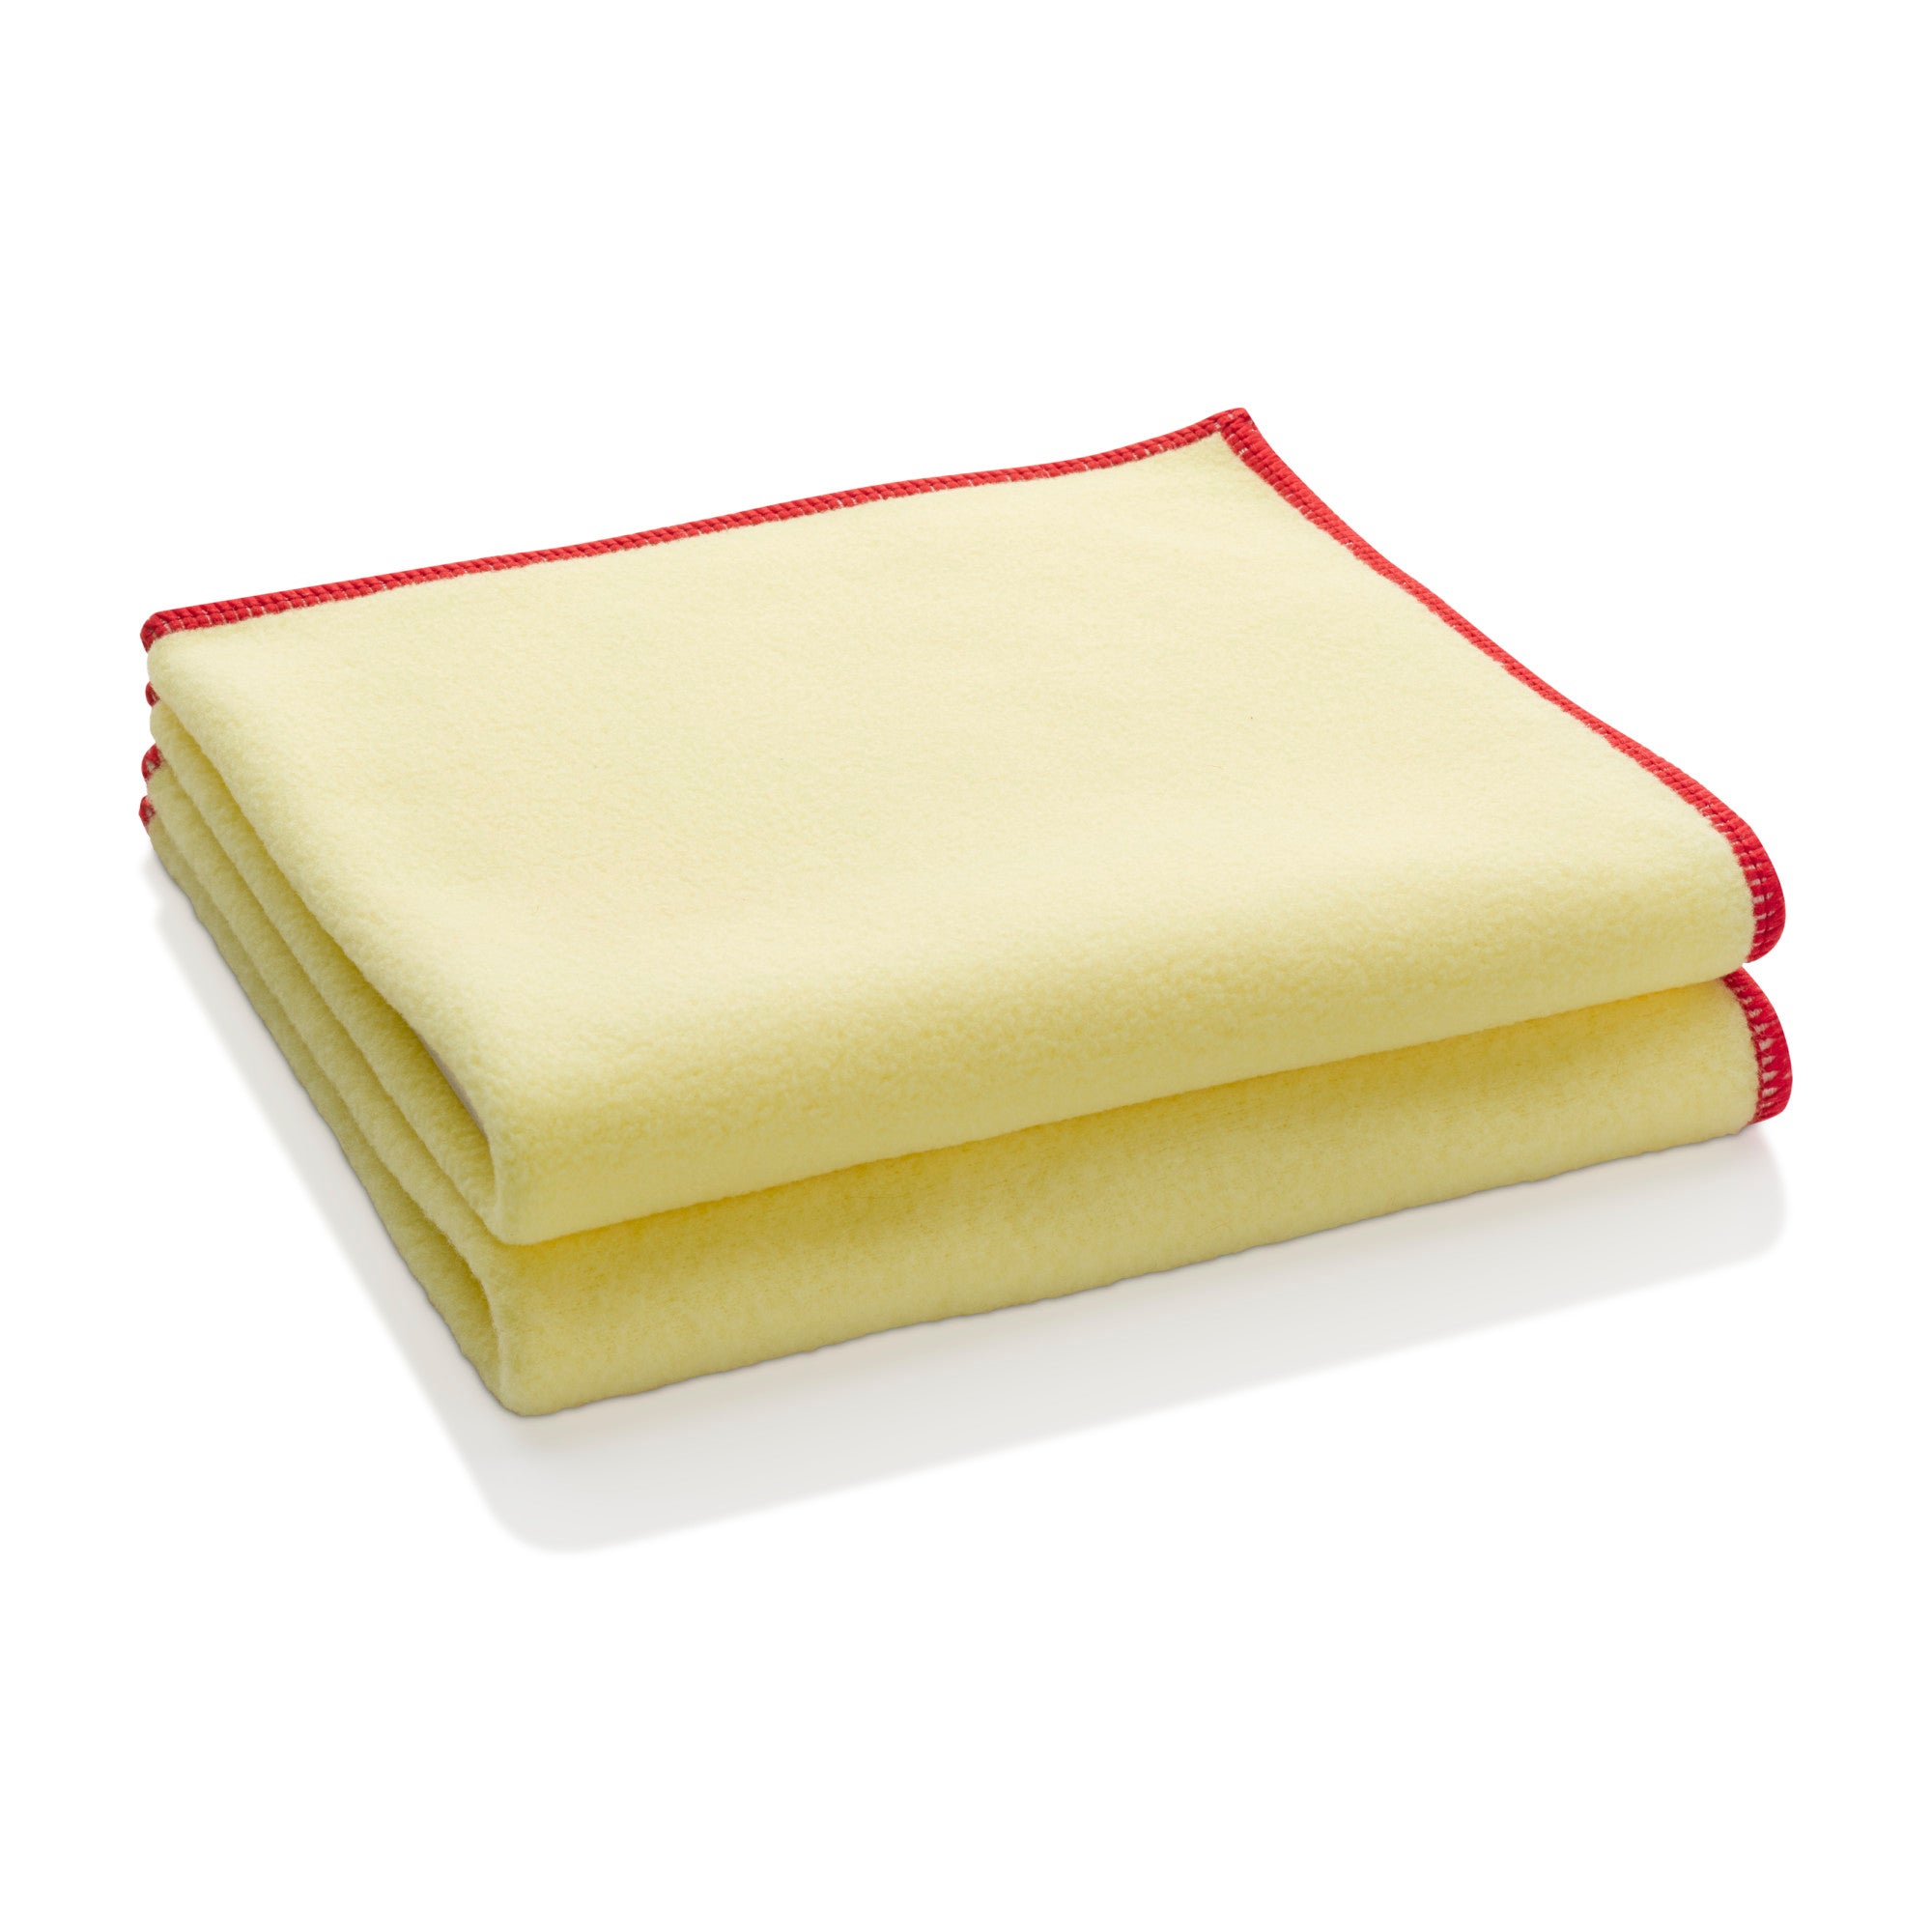 Microfiber Dusting Cloths | Allergen-Free Dusting Products - E-Cloth Inc.